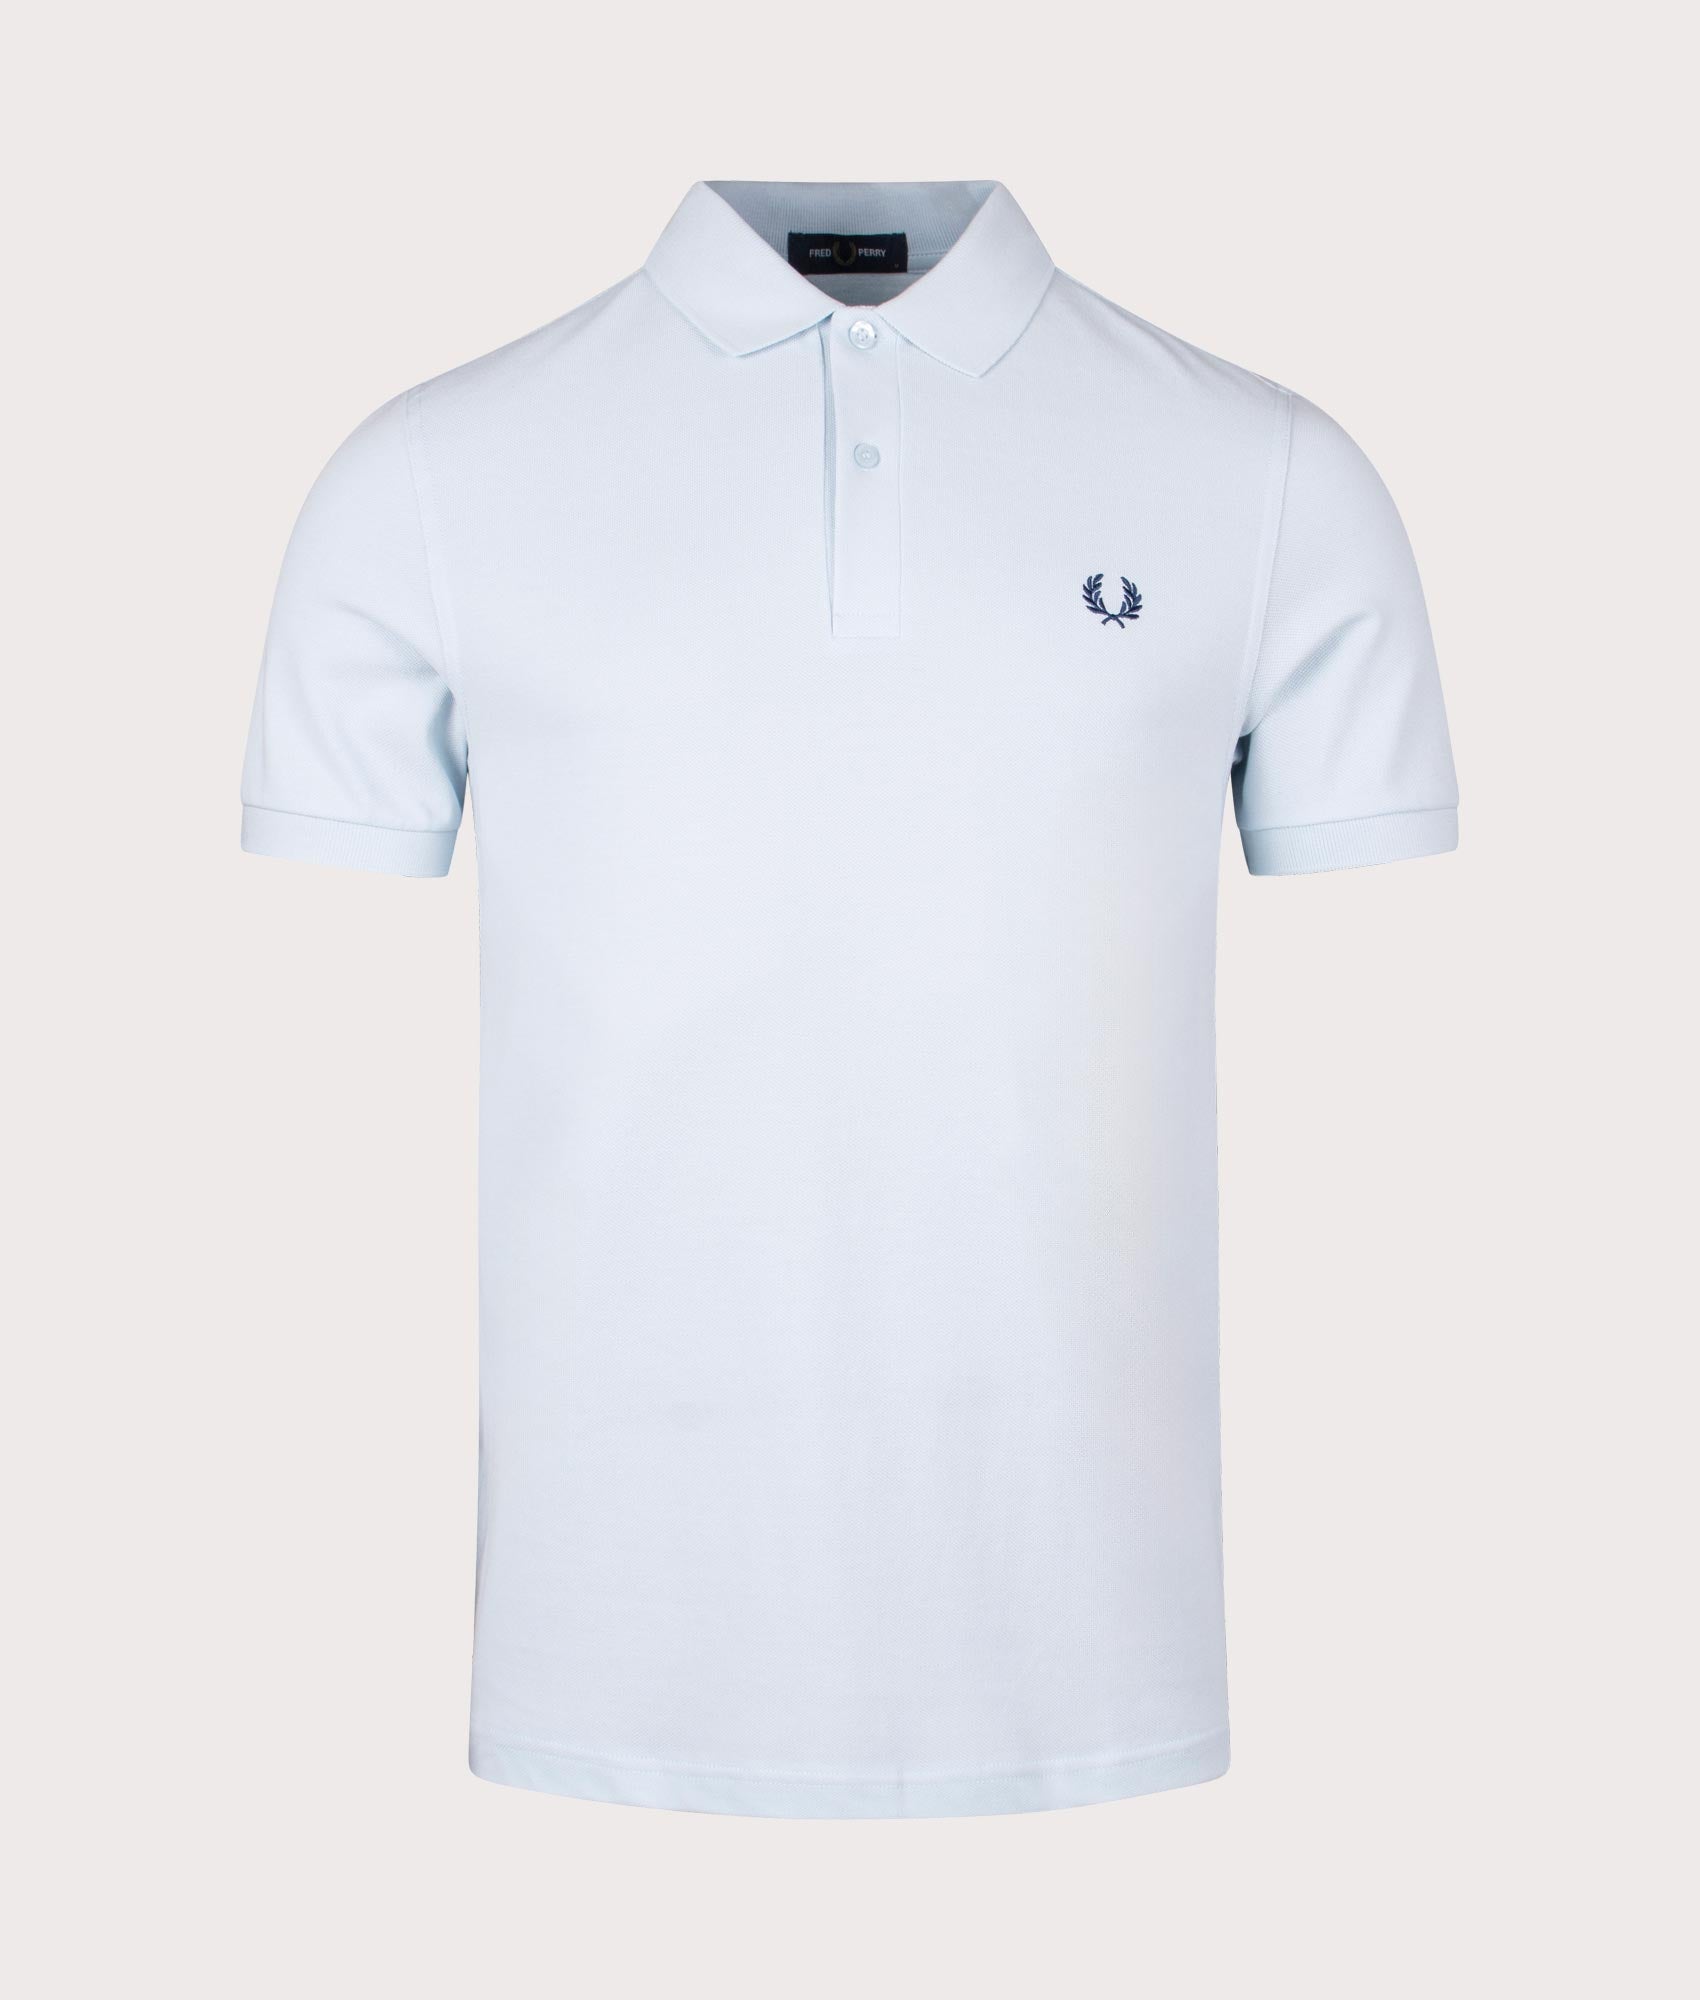 Fred Perry Mens M6000 Polo Shirt - Colour: V08 Light Ice/Midnight Blue - Size: XXL